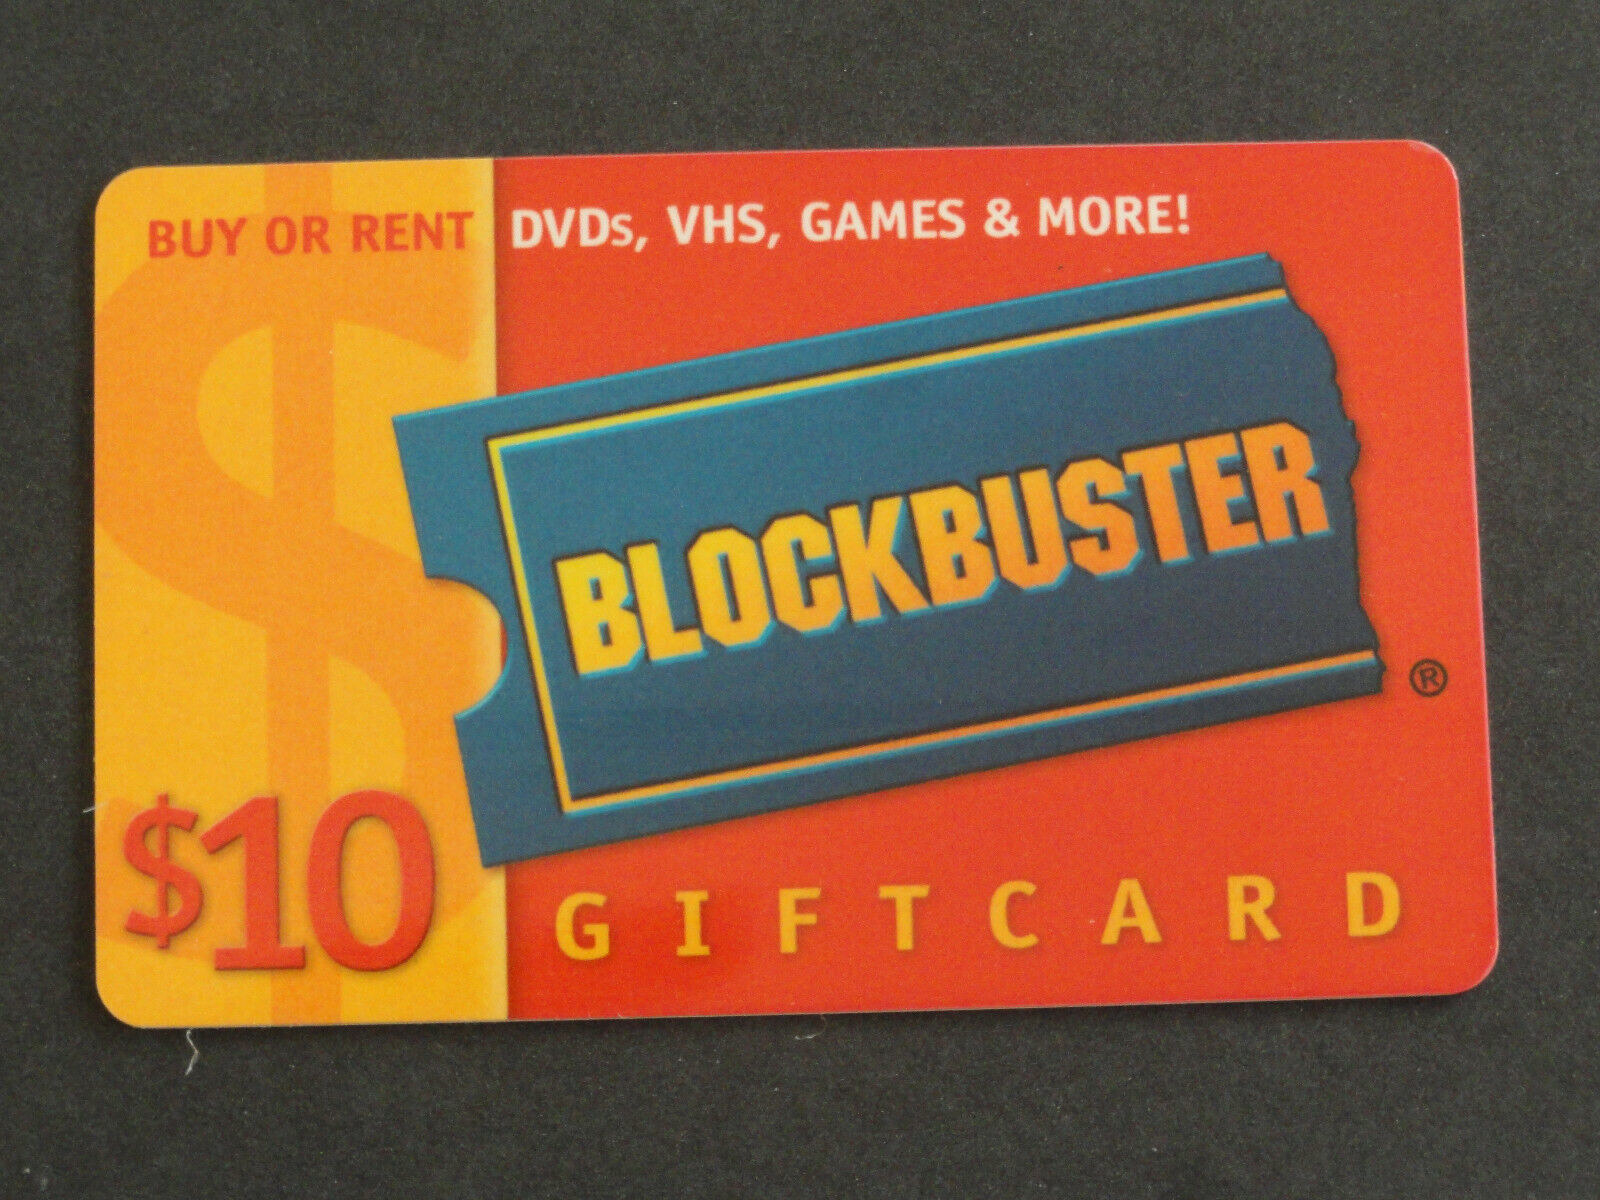 A $10 Blockbuster gift card